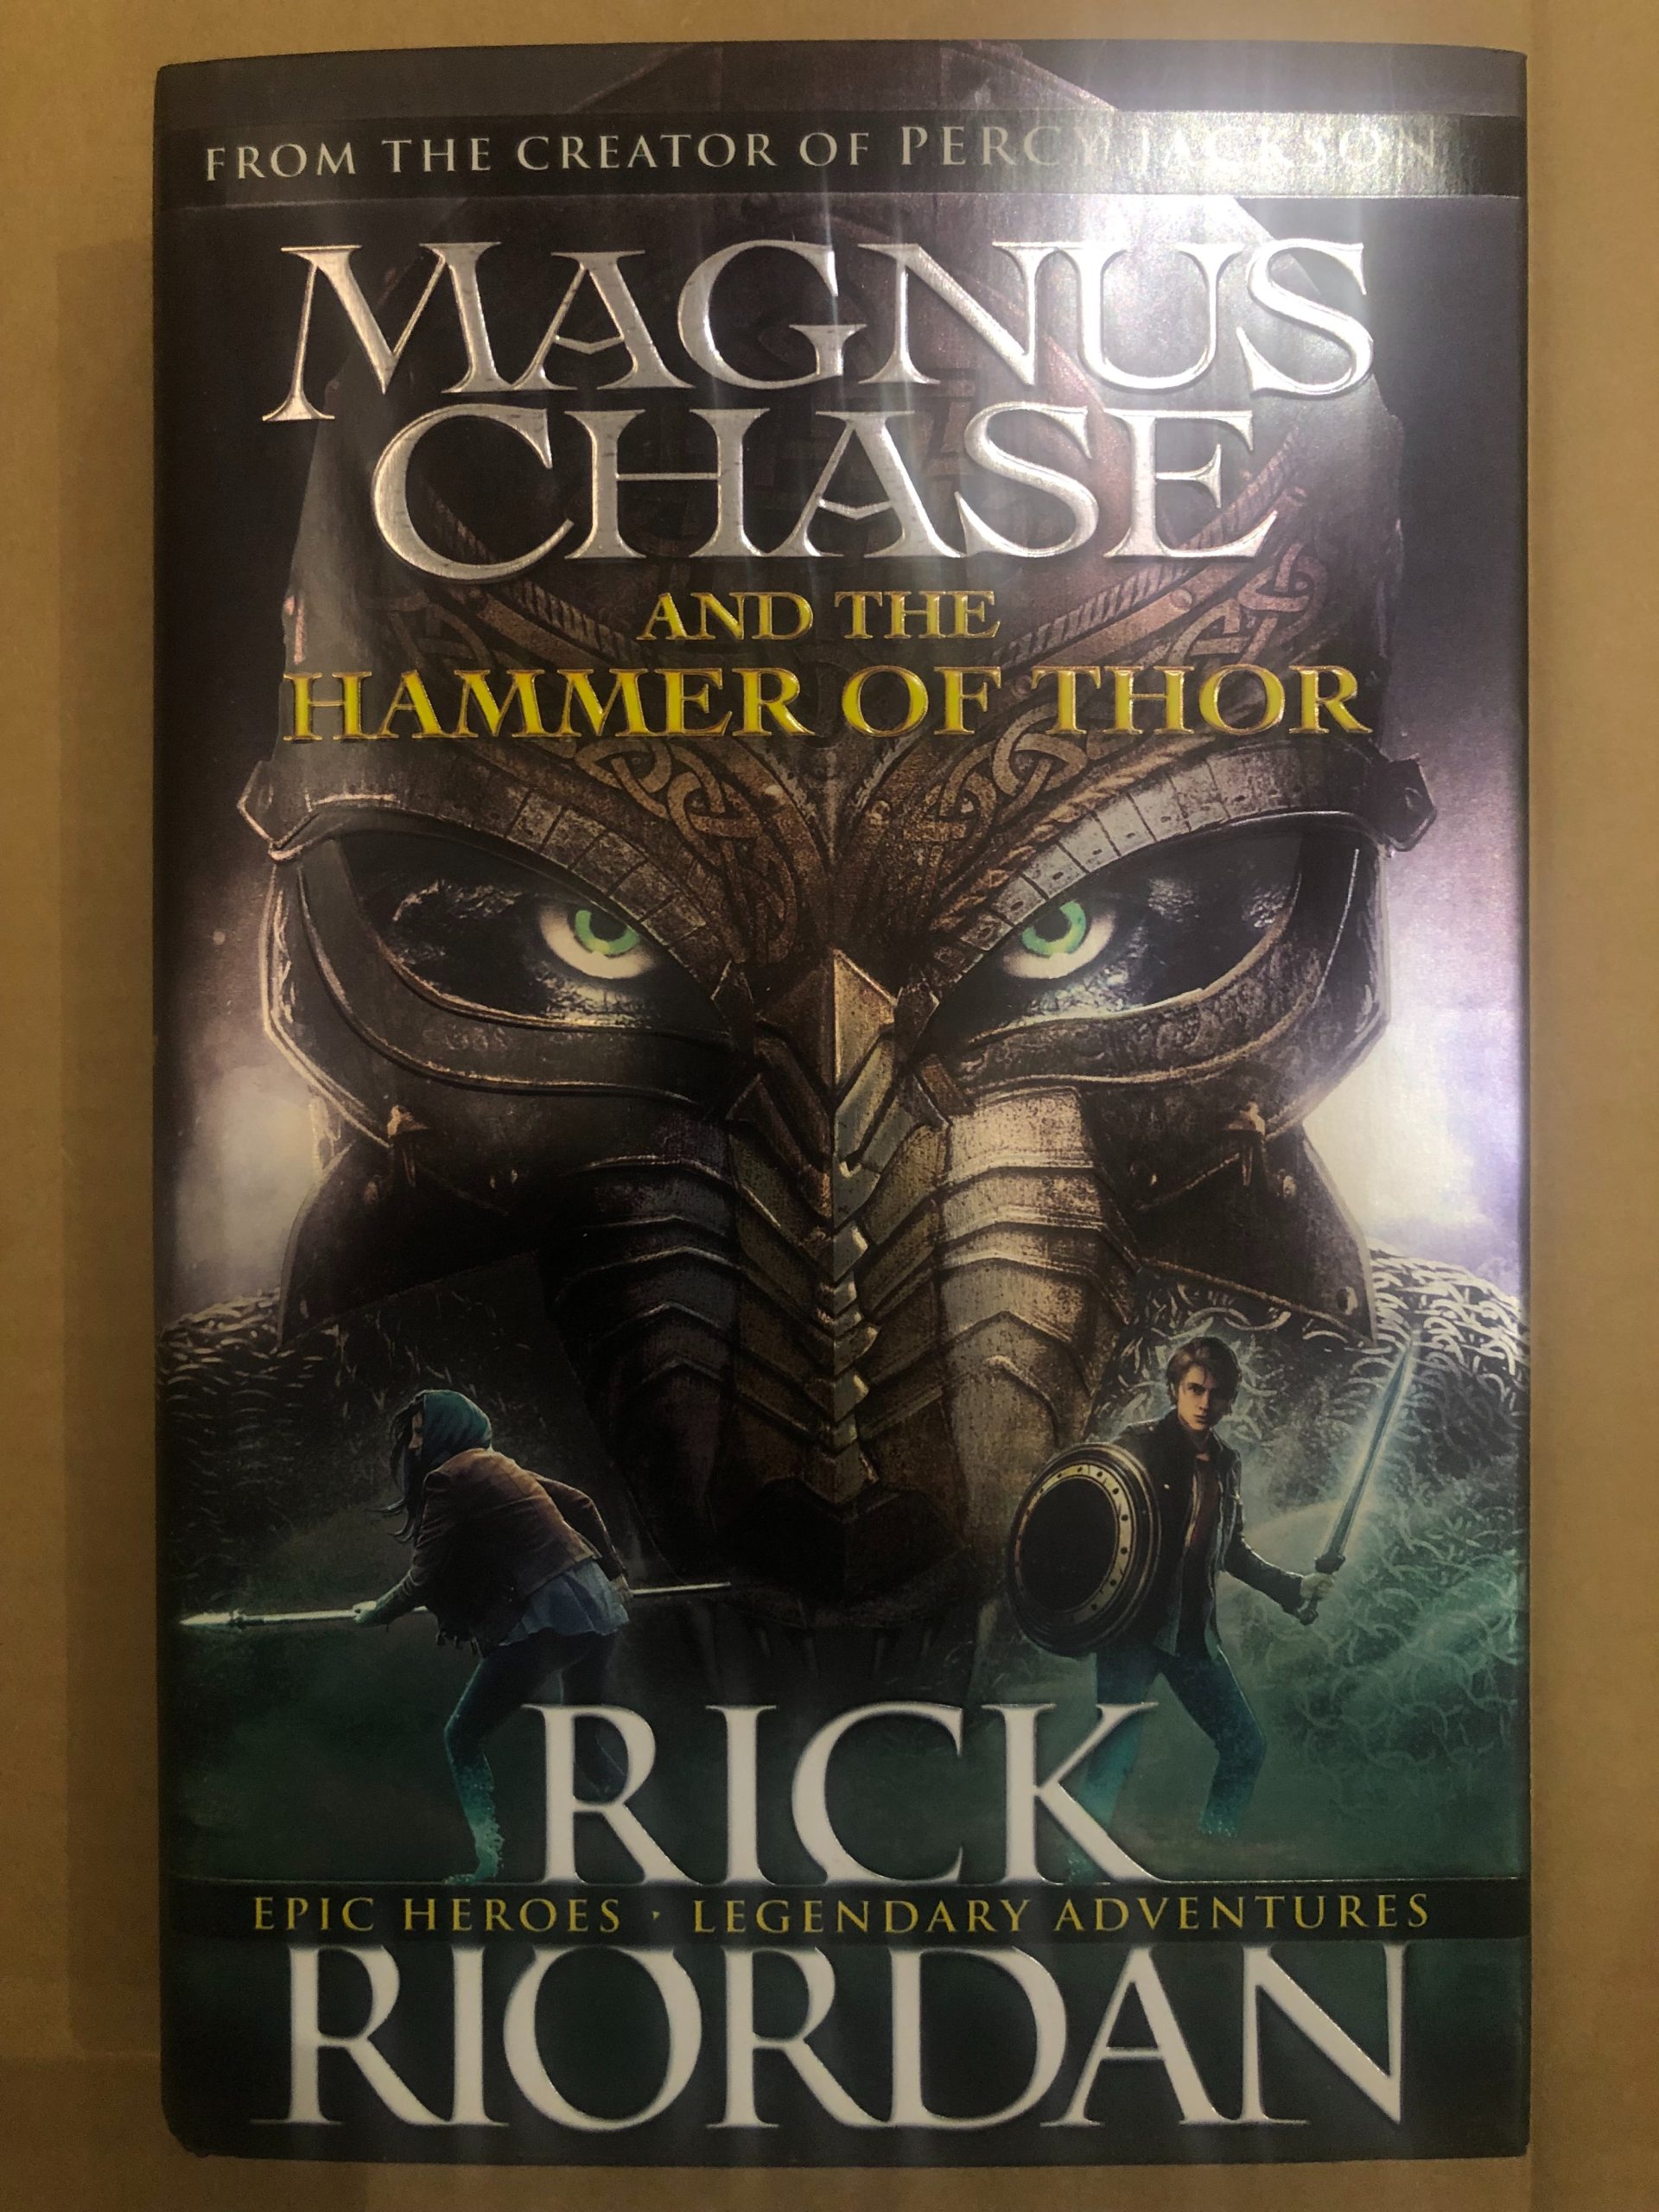 Magnus Chase and the Hammer of Thor (Book 2) by Rick Riordan (Hardcover)